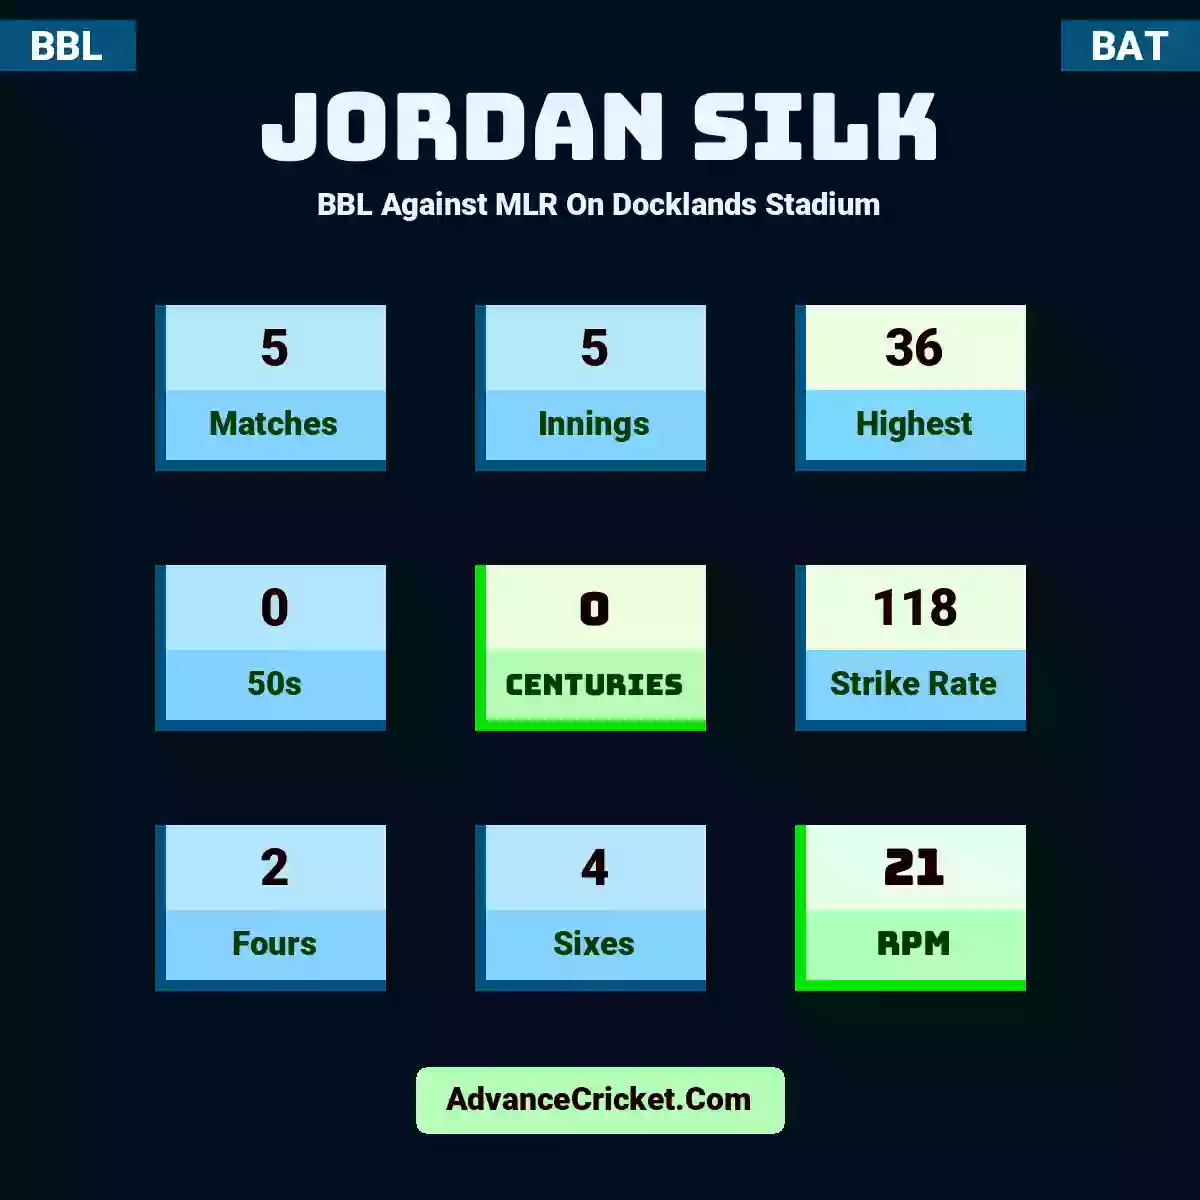 Jordan Silk BBL  Against MLR On Docklands Stadium, Jordan Silk played 5 matches, scored 36 runs as highest, 0 half-centuries, and 0 centuries, with a strike rate of 118. J.Silk hit 2 fours and 4 sixes, with an RPM of 21.